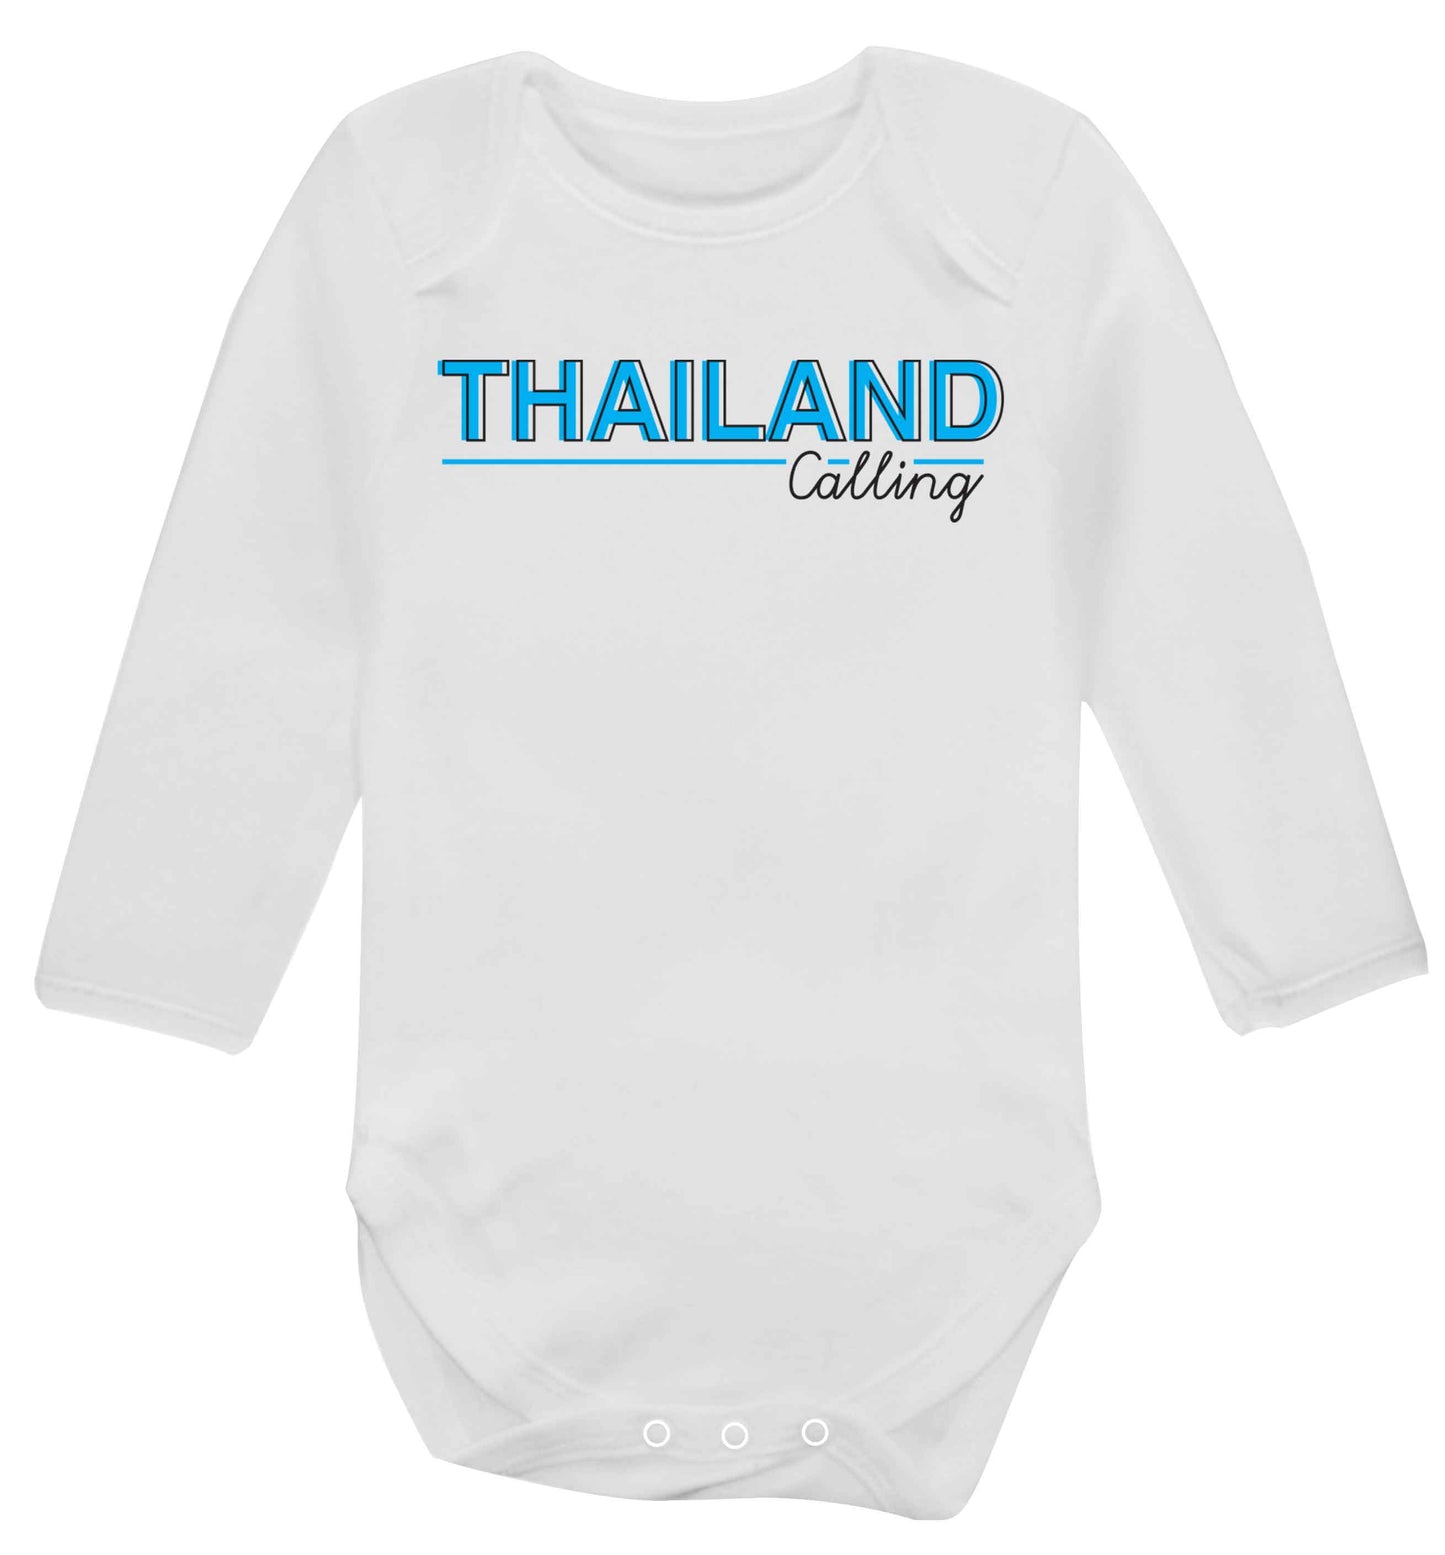 Thailand calling Baby Vest long sleeved white 6-12 months